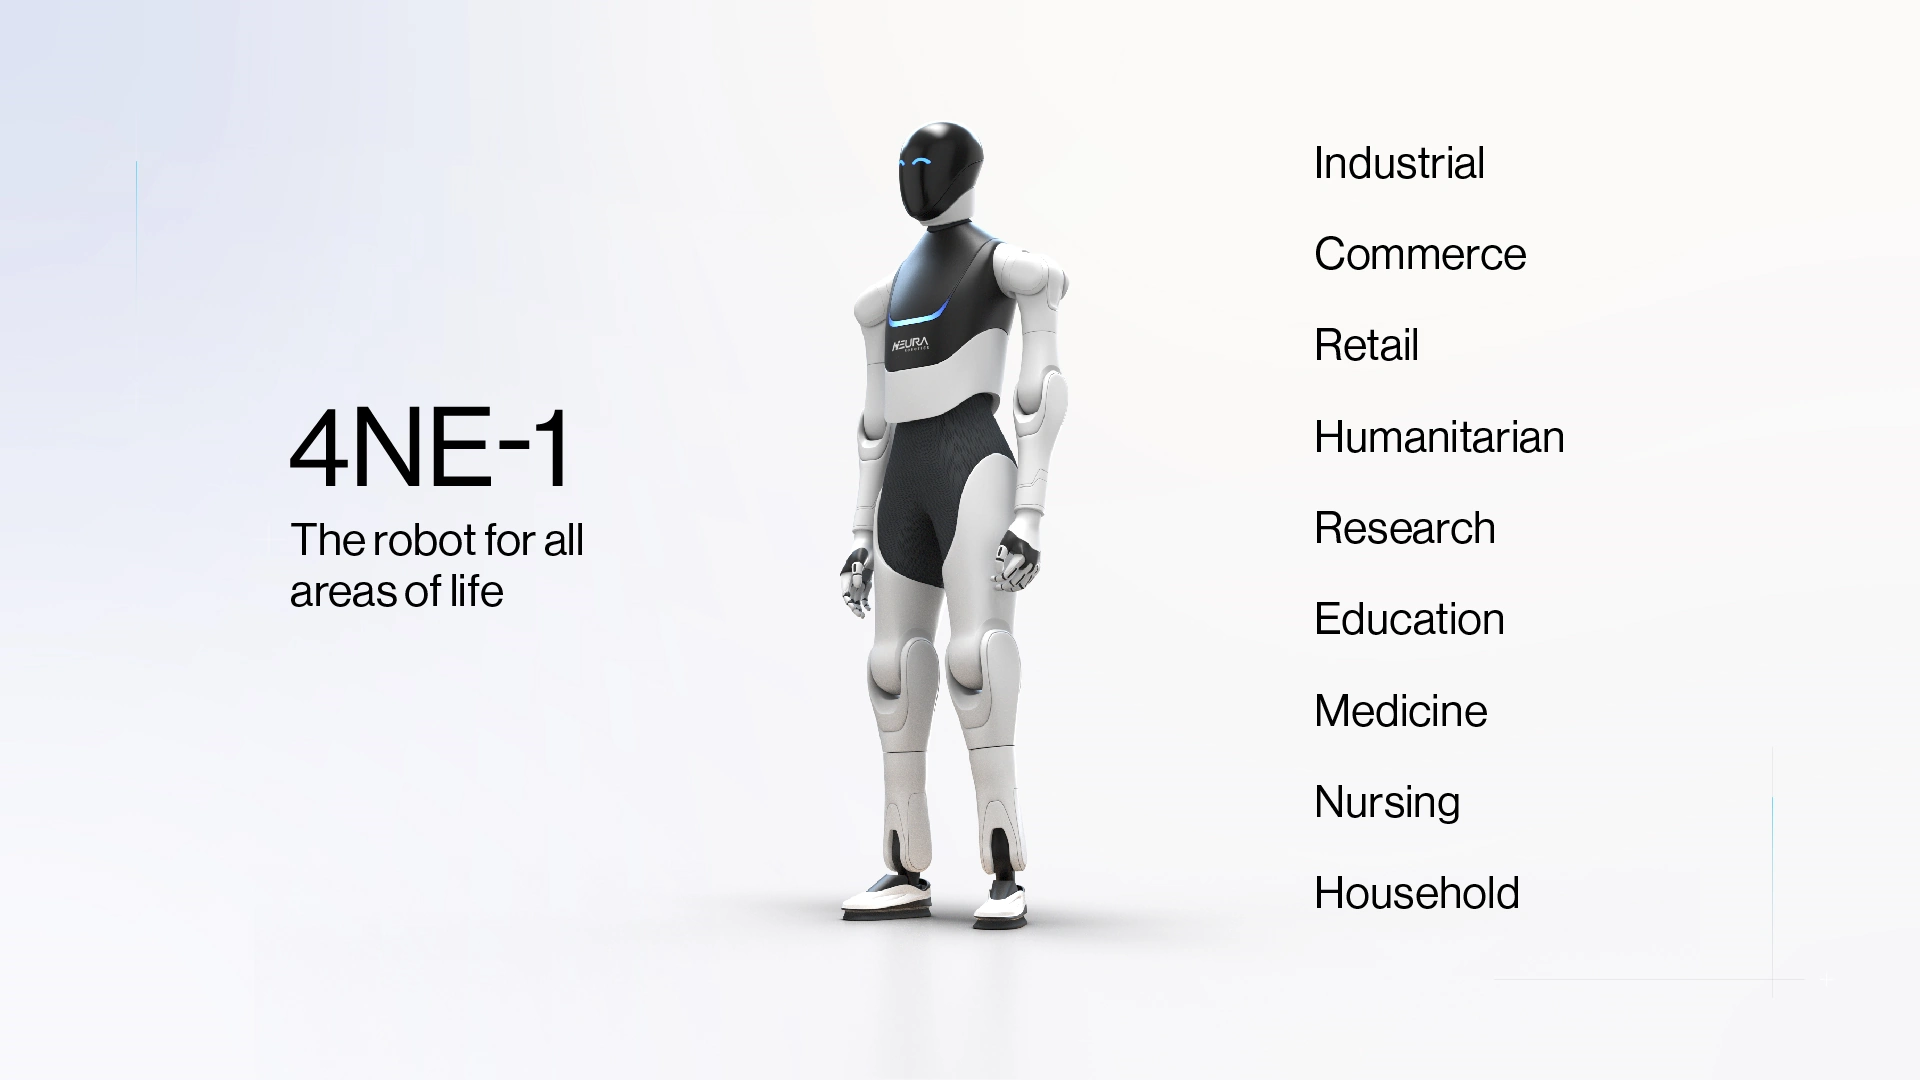 4NE-1, the robot for all areas of life